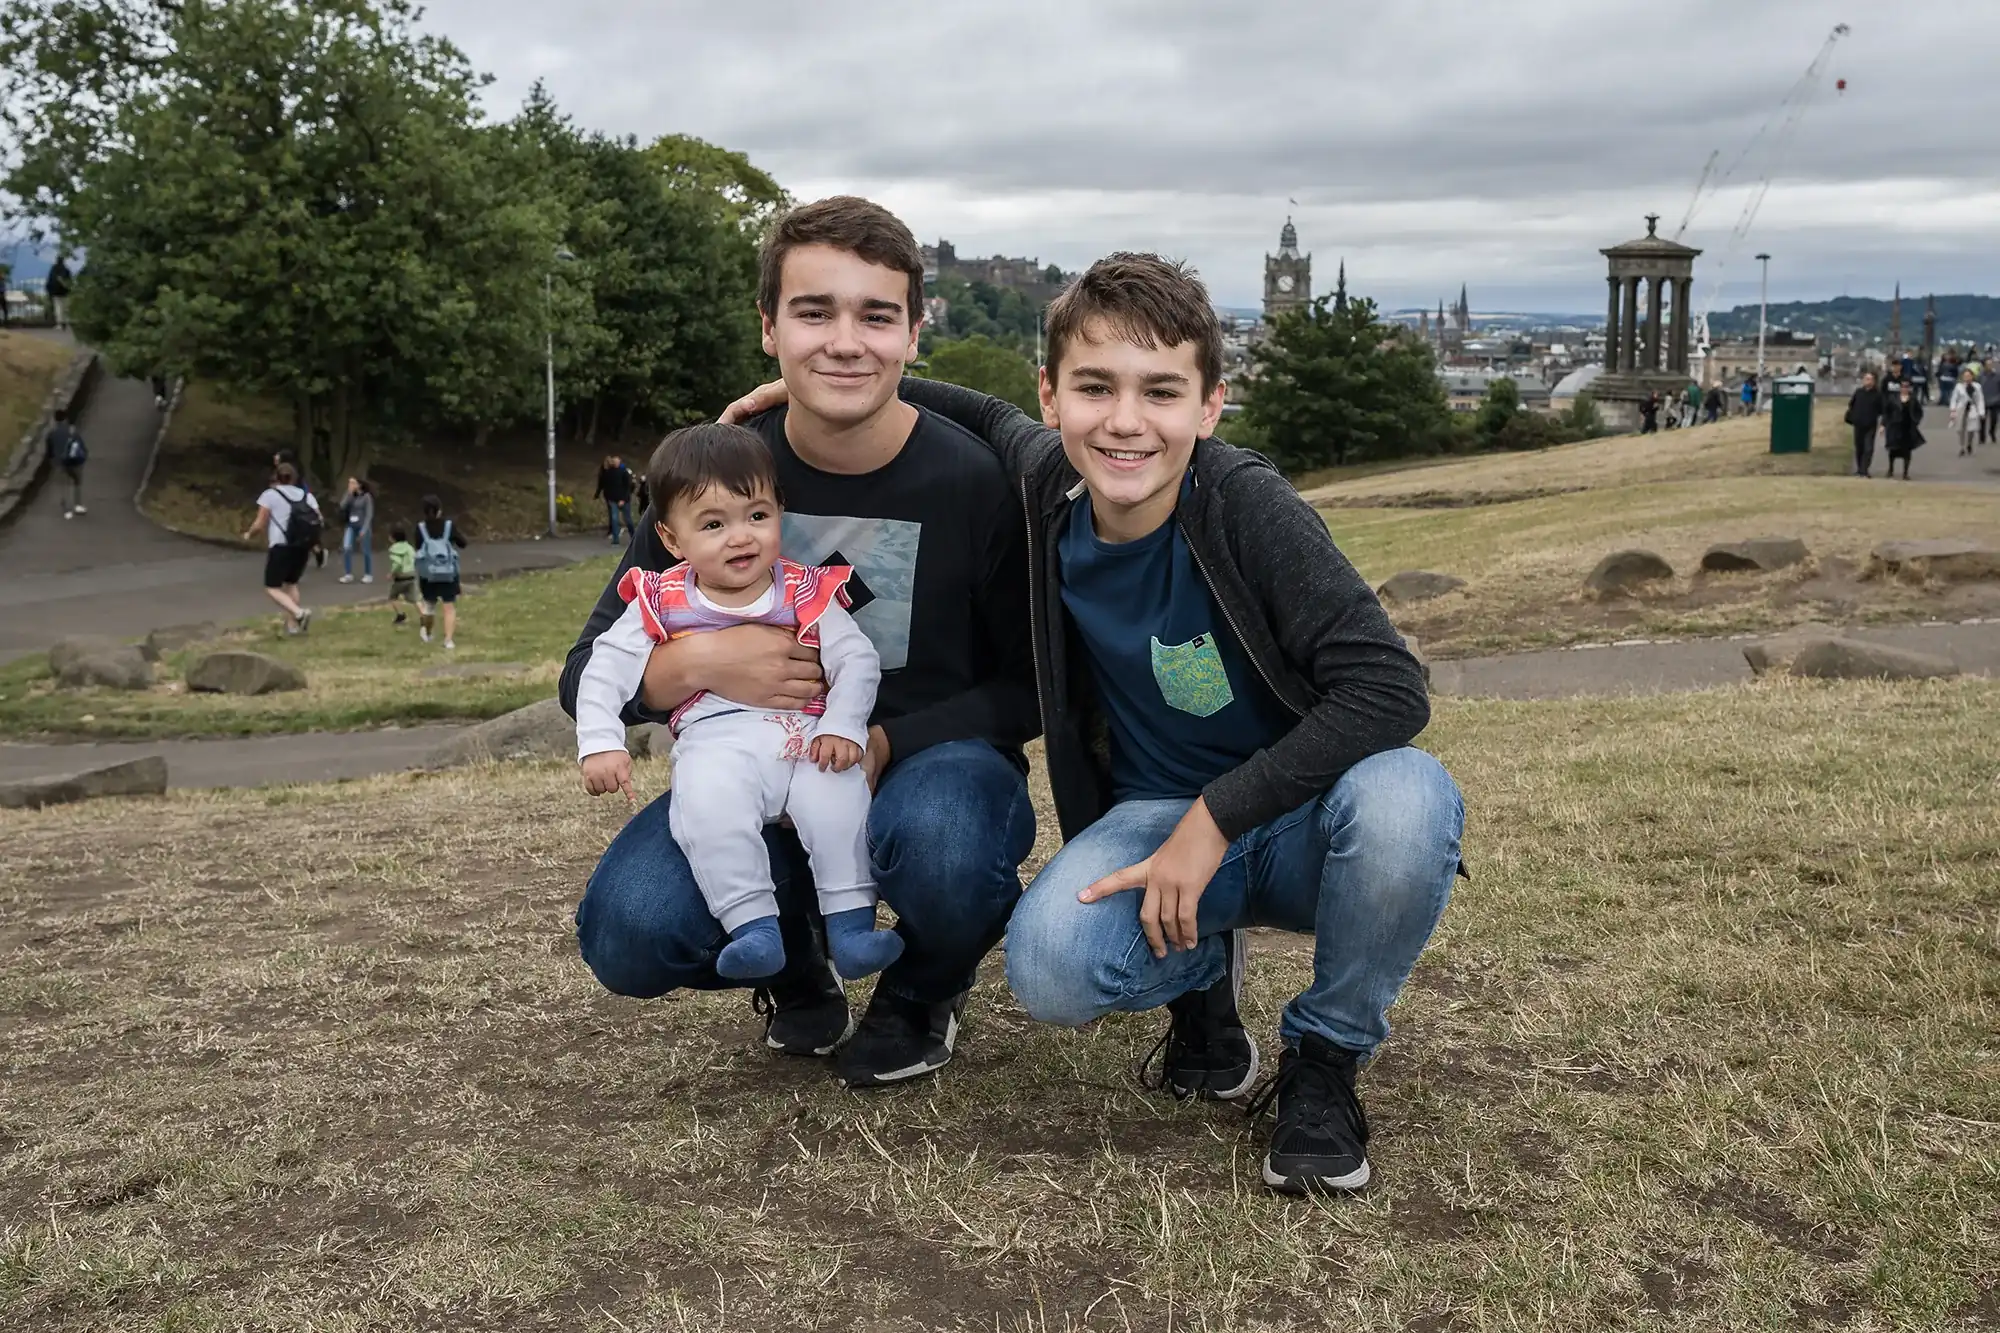 Three boys kneel on a grassy hill, with two older boys smiling and holding a baby. A park, trees, and buildings are visible in the background under a cloudy sky.